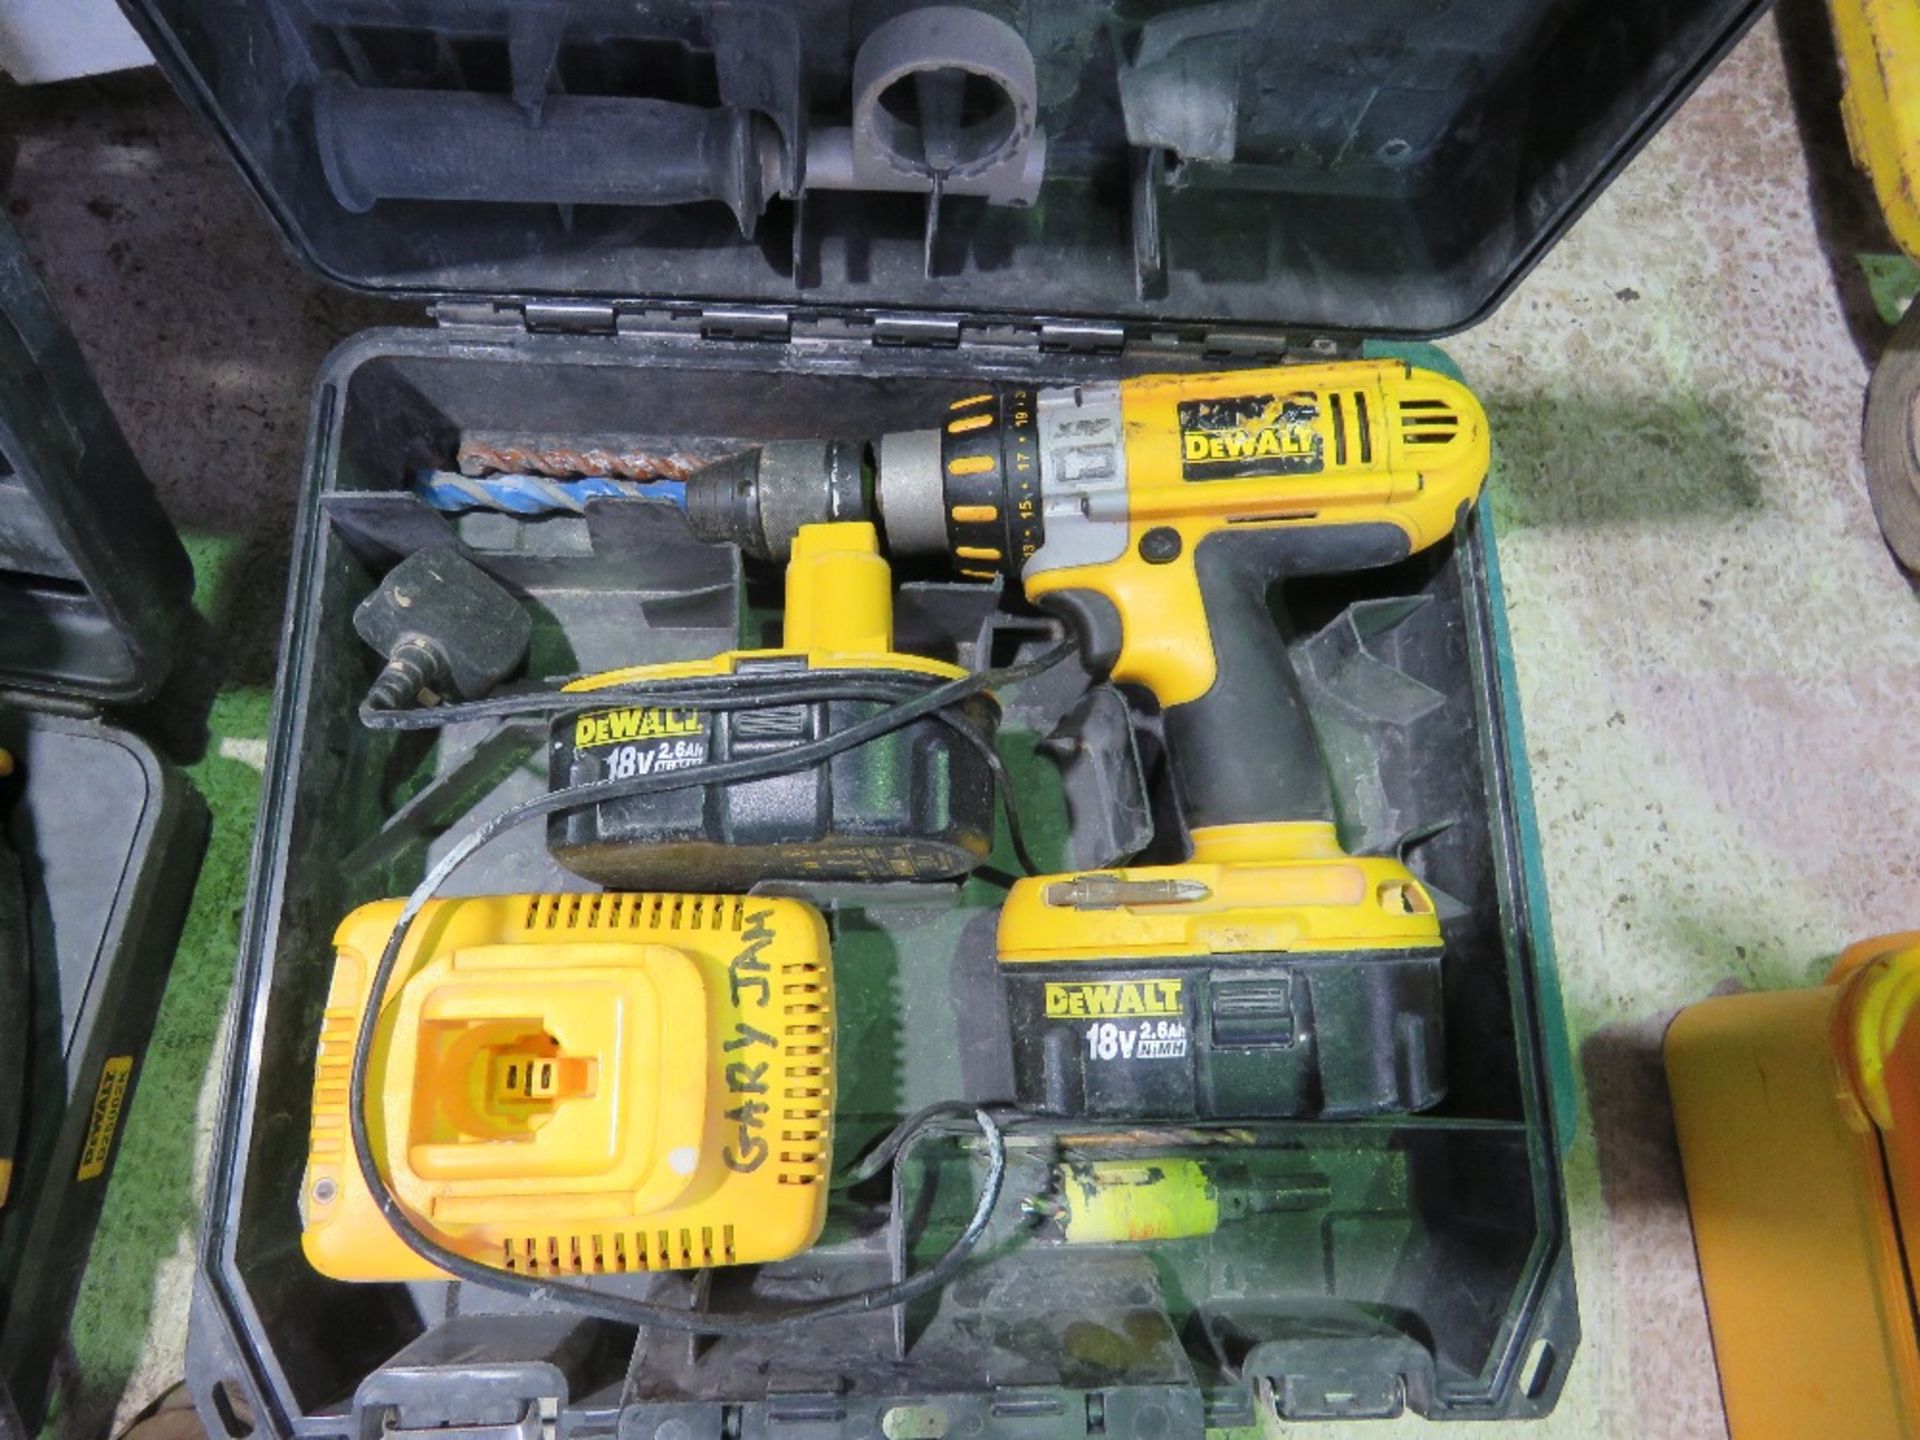 MAKITA BATTERY JIGSAW BODY PLUS A DEWALT BATTERY DRILL. DIRECT FROM LOCAL COMPANY. - Image 4 of 4